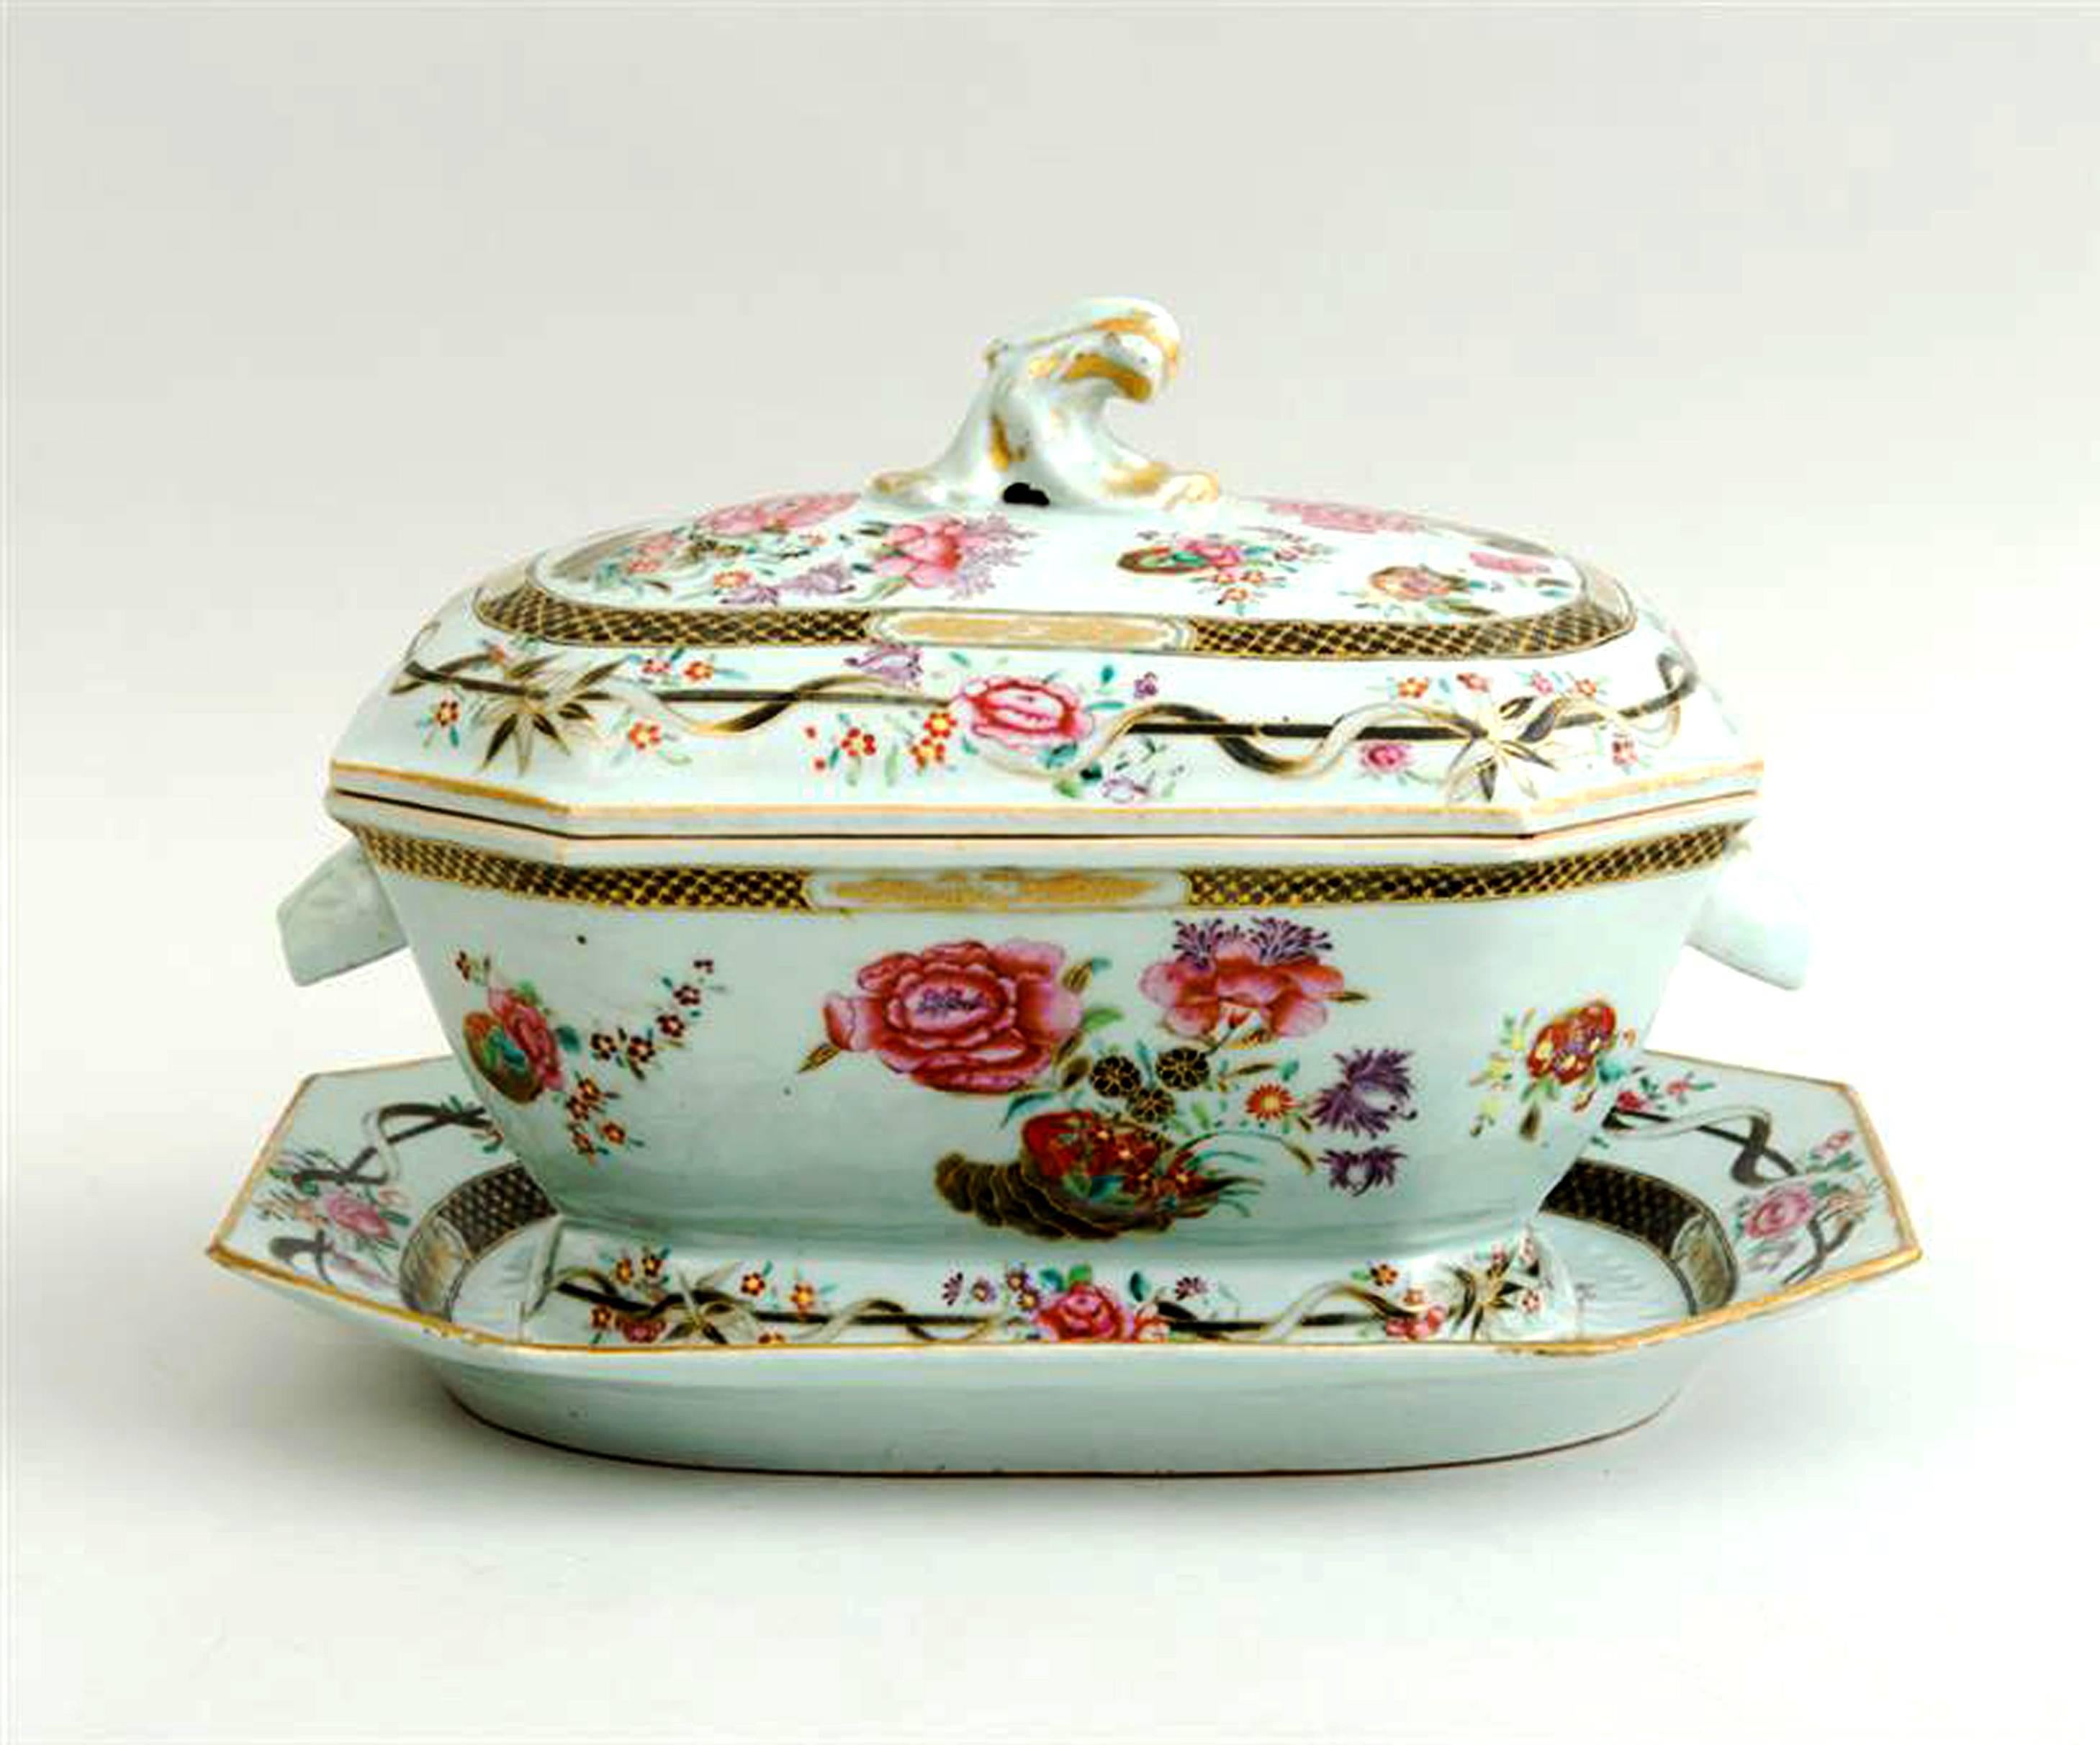 Chinese export porcelain famille rose soup tureen, cover and stand,
circa 1765.

The fine Chinese Export porcelain soup tureen, cover and stand is painted in famille rose enamels with an unusual flowers in cornucopia design.